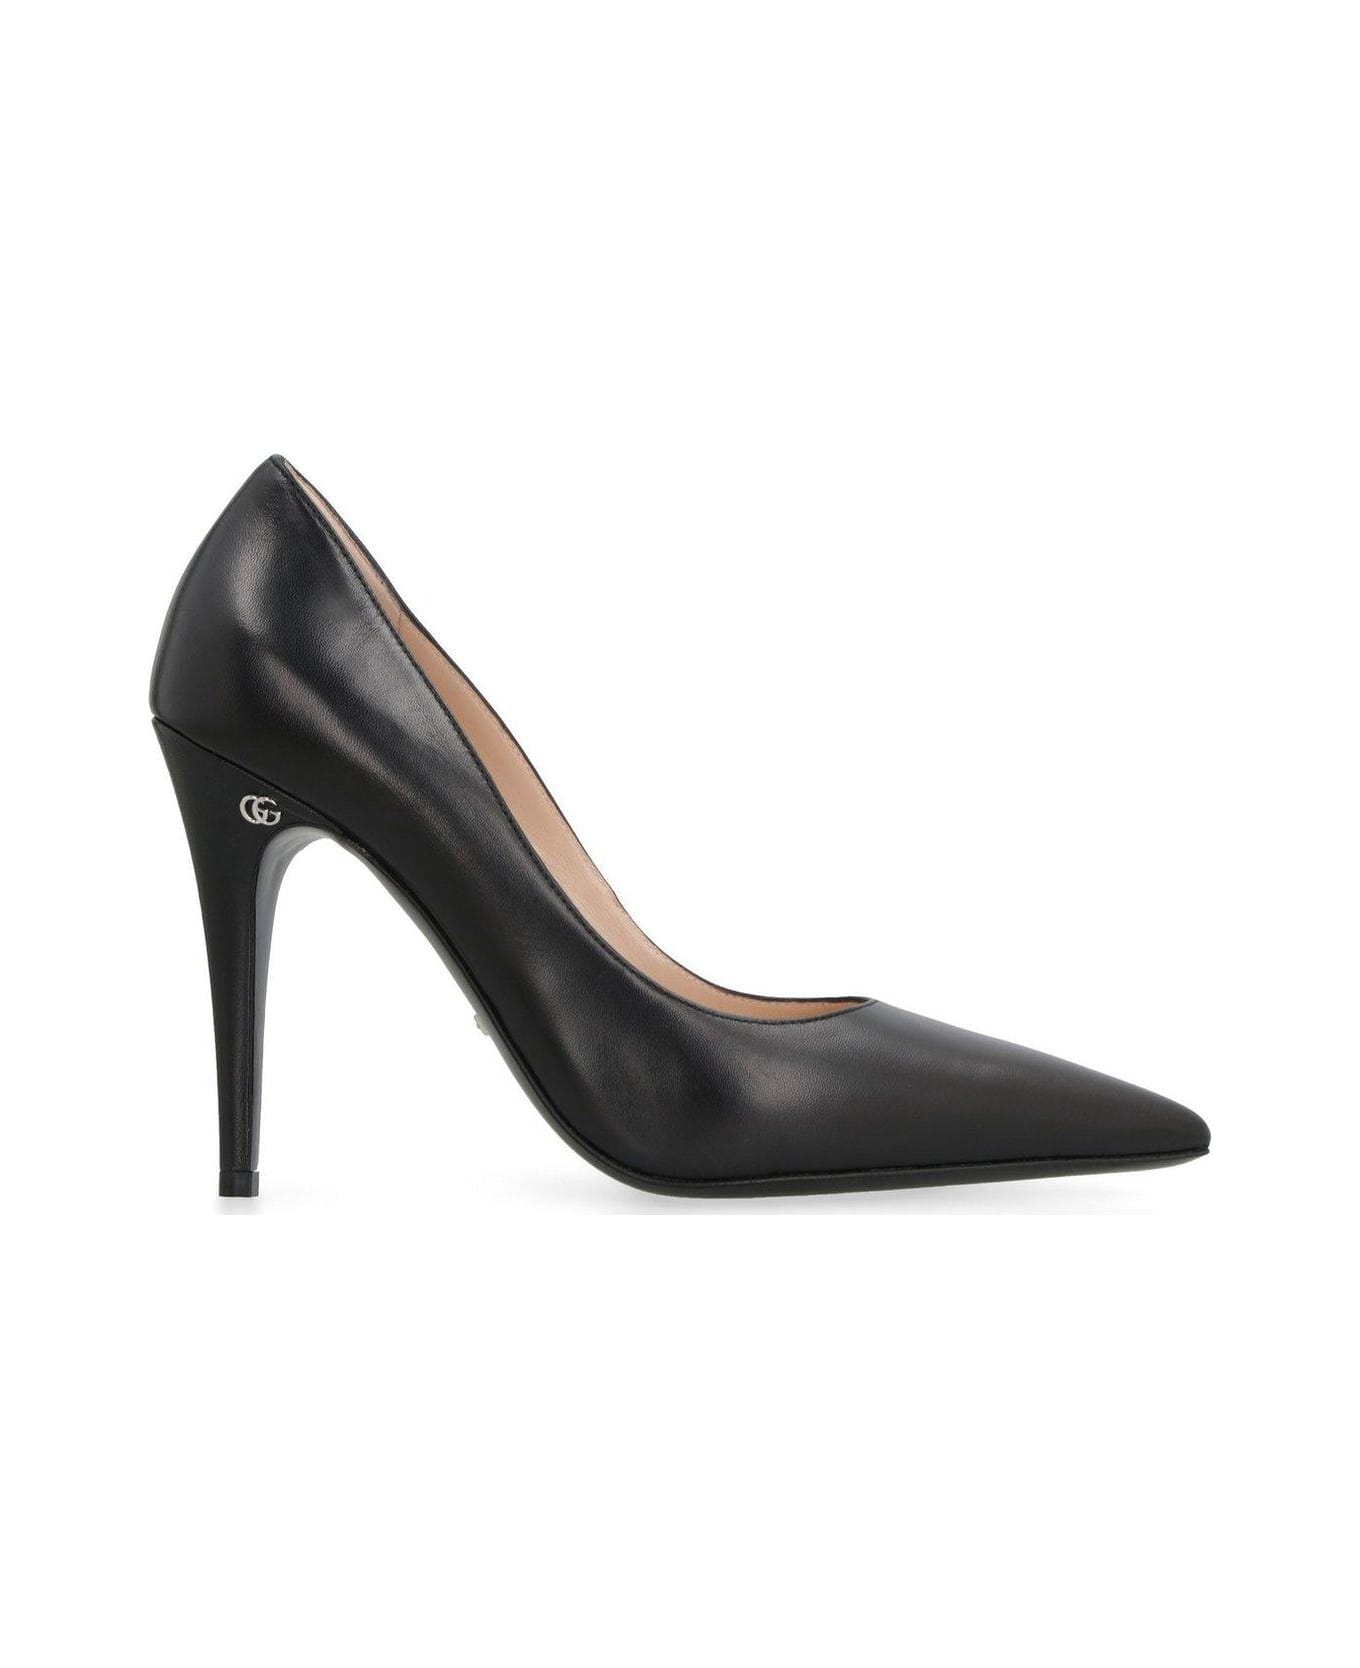 Gucci Logo Detailed Pointed-toe Pumps - Black ハイヒール